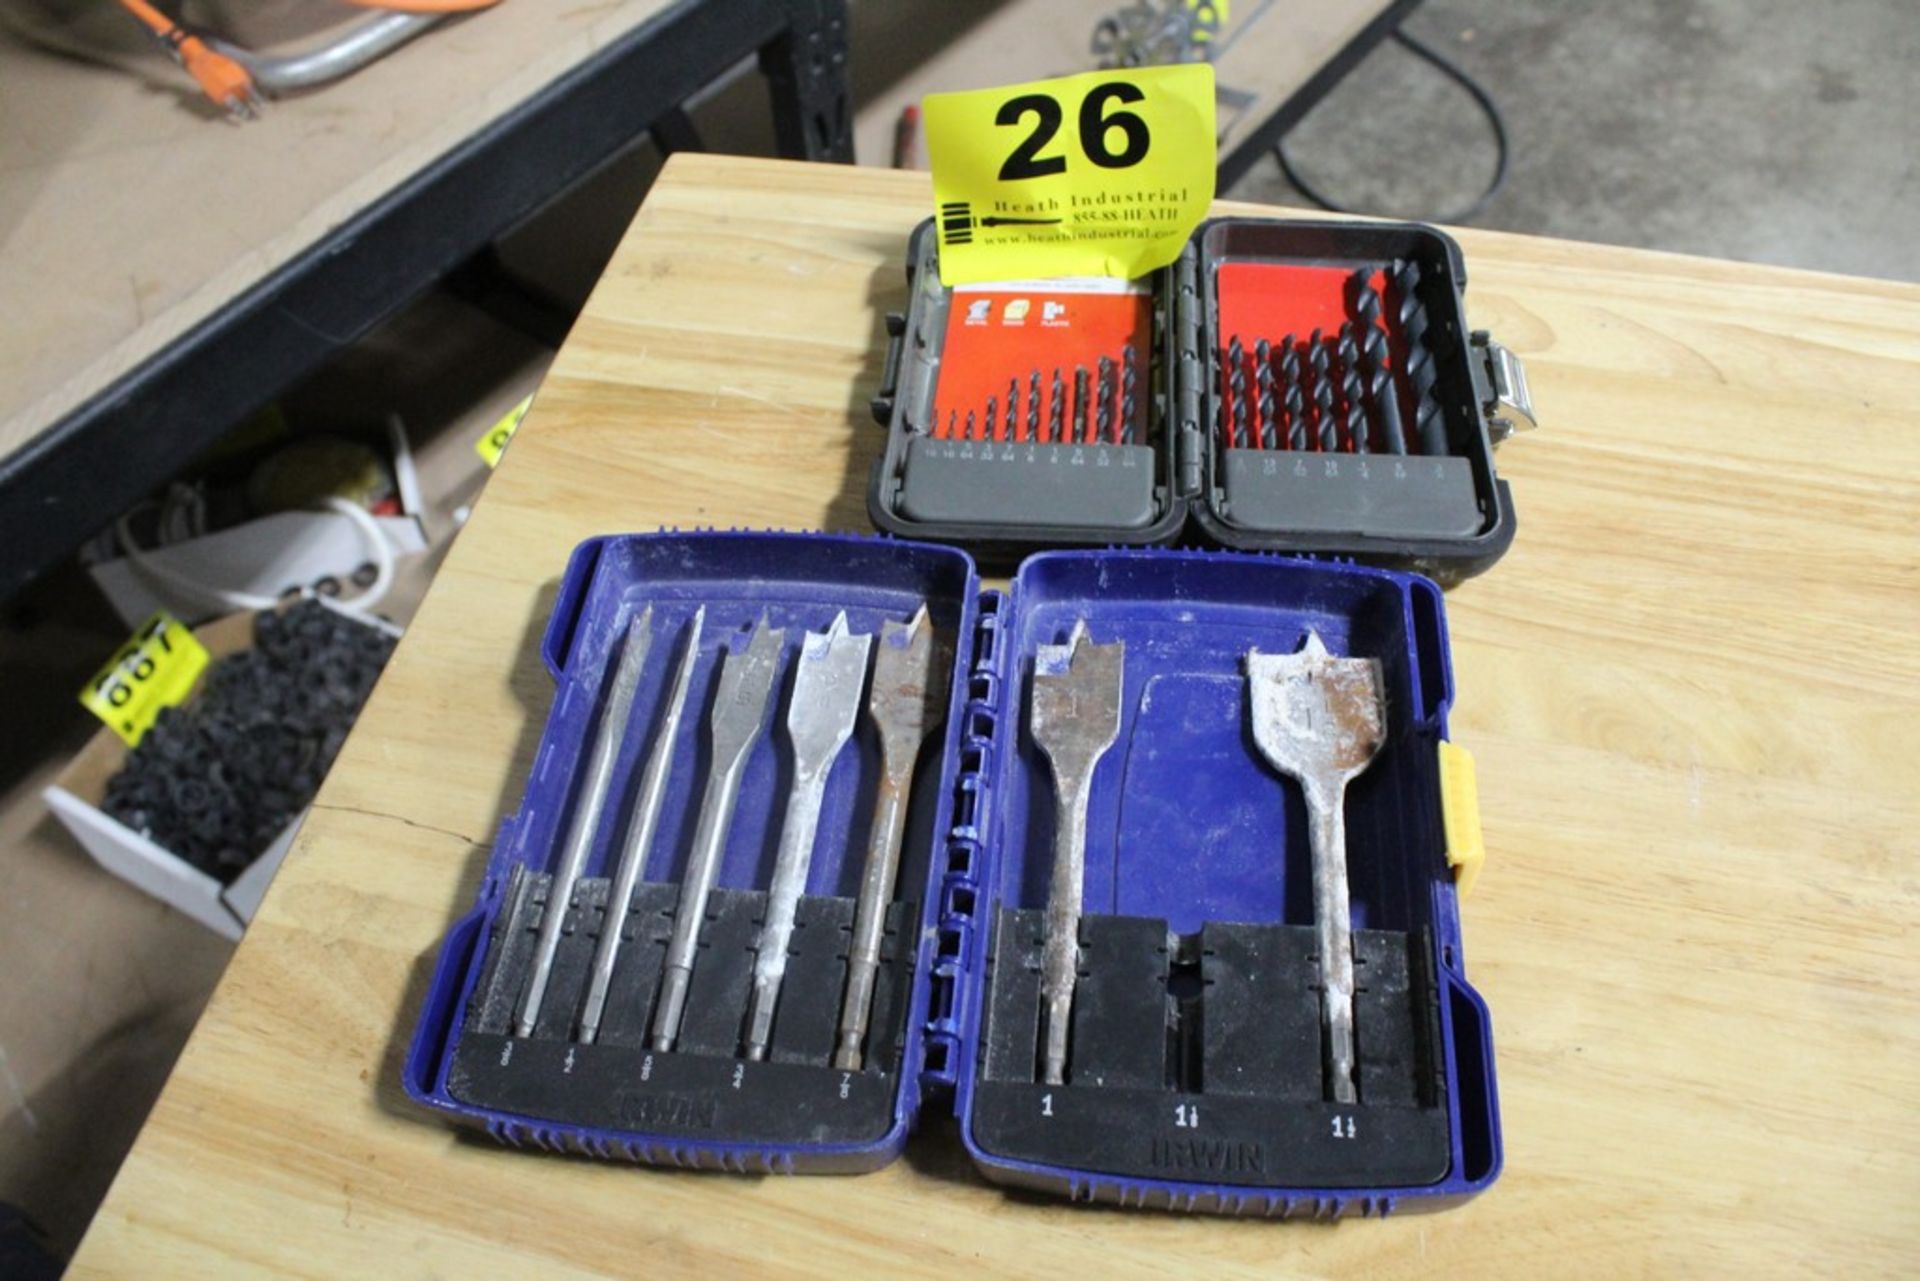 IRWIN BORING BITS AND DO-IT DRILL INDEX SET